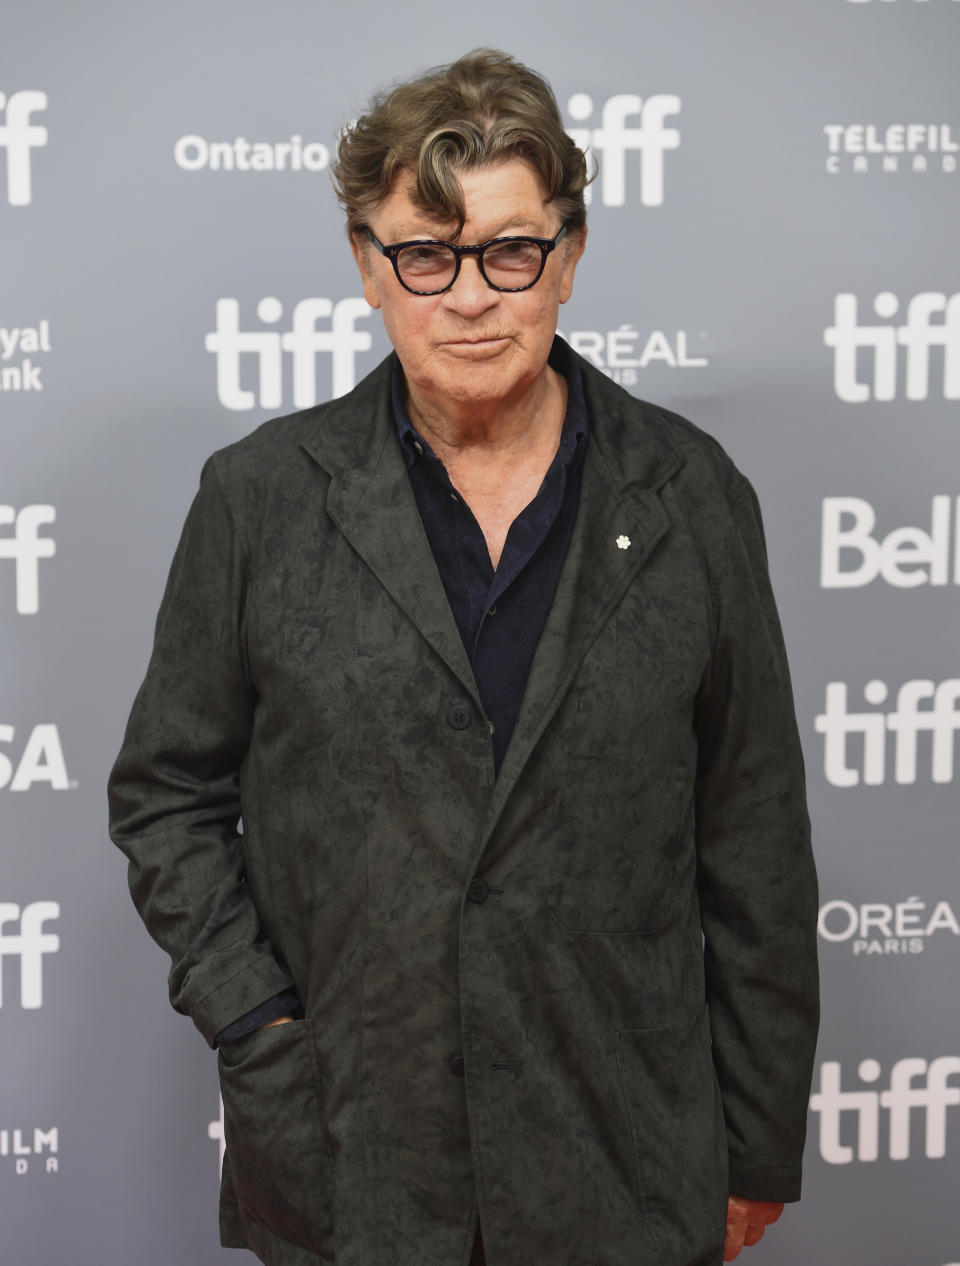 FILE - Robbie Robertson attends a press conference for "Once Were Brothers: Robbie Robertson and The Band" on day one of the Toronto International Film Festival on Thursday, Sept. 5, 2019, in Toronto. Robertson, the lead guitarist and songwriter for The Band, whose classics include “The Weight,” “Up on Cripple Creek” and “The Night They Drove Old Dixie Down,” has died at 80, according to a statement from his manager. (Photo by Chris Pizzello/Invision/AP, File)